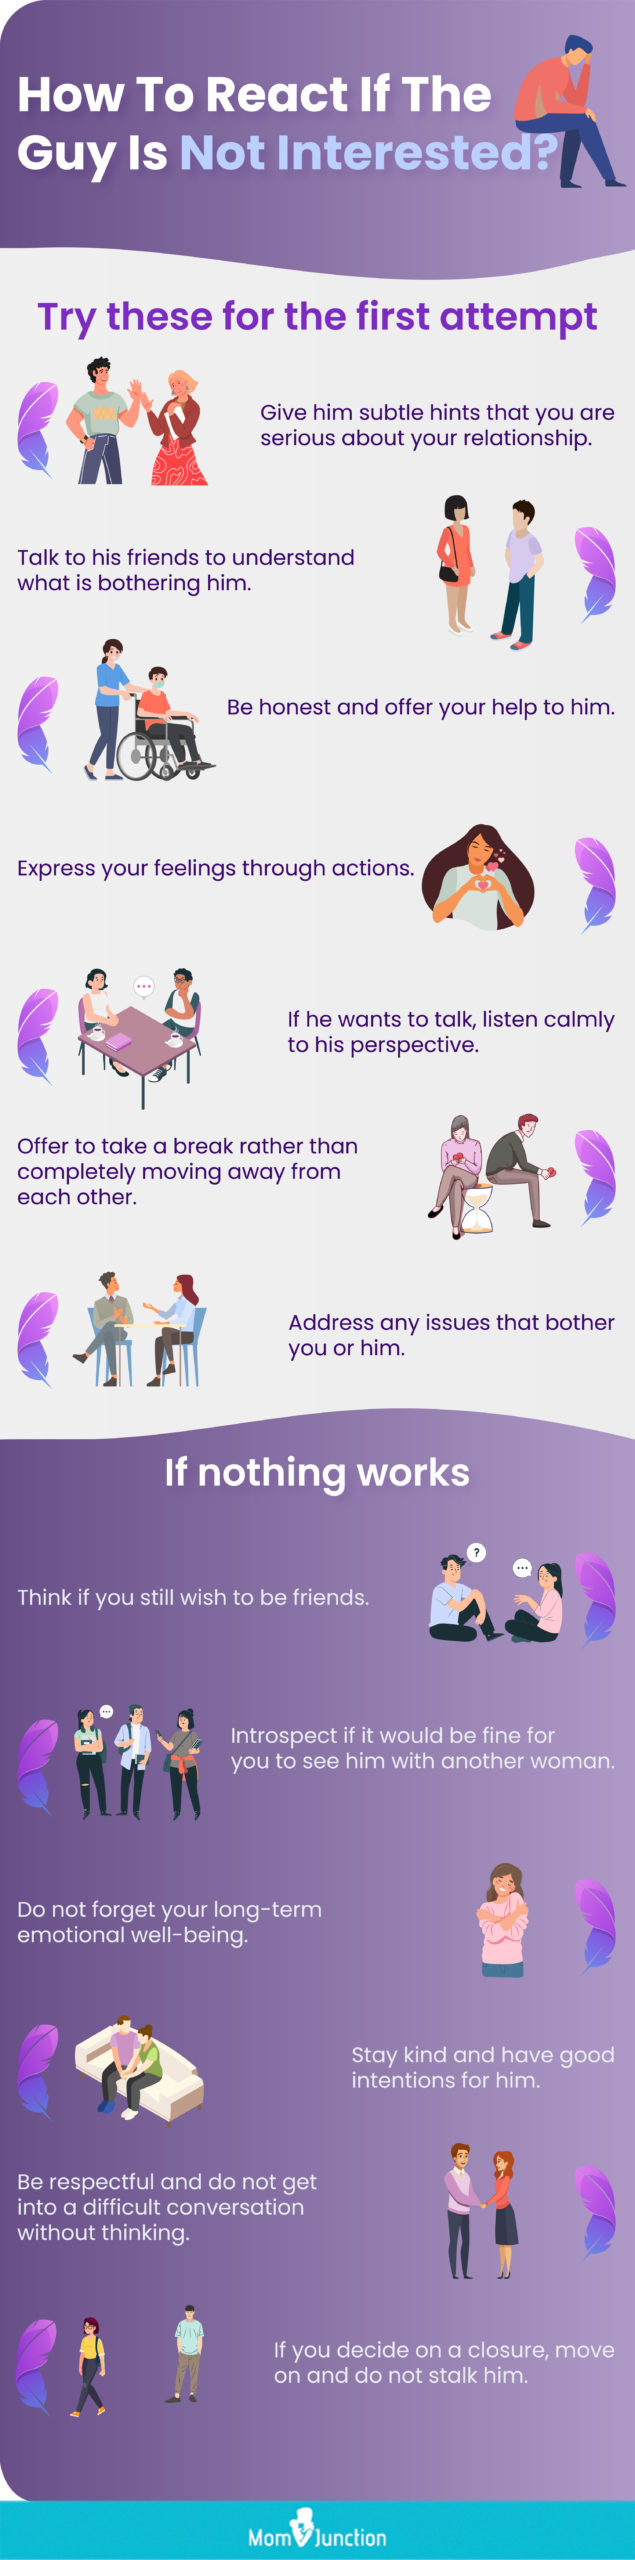 how to react if the guy is not interested (infographic)